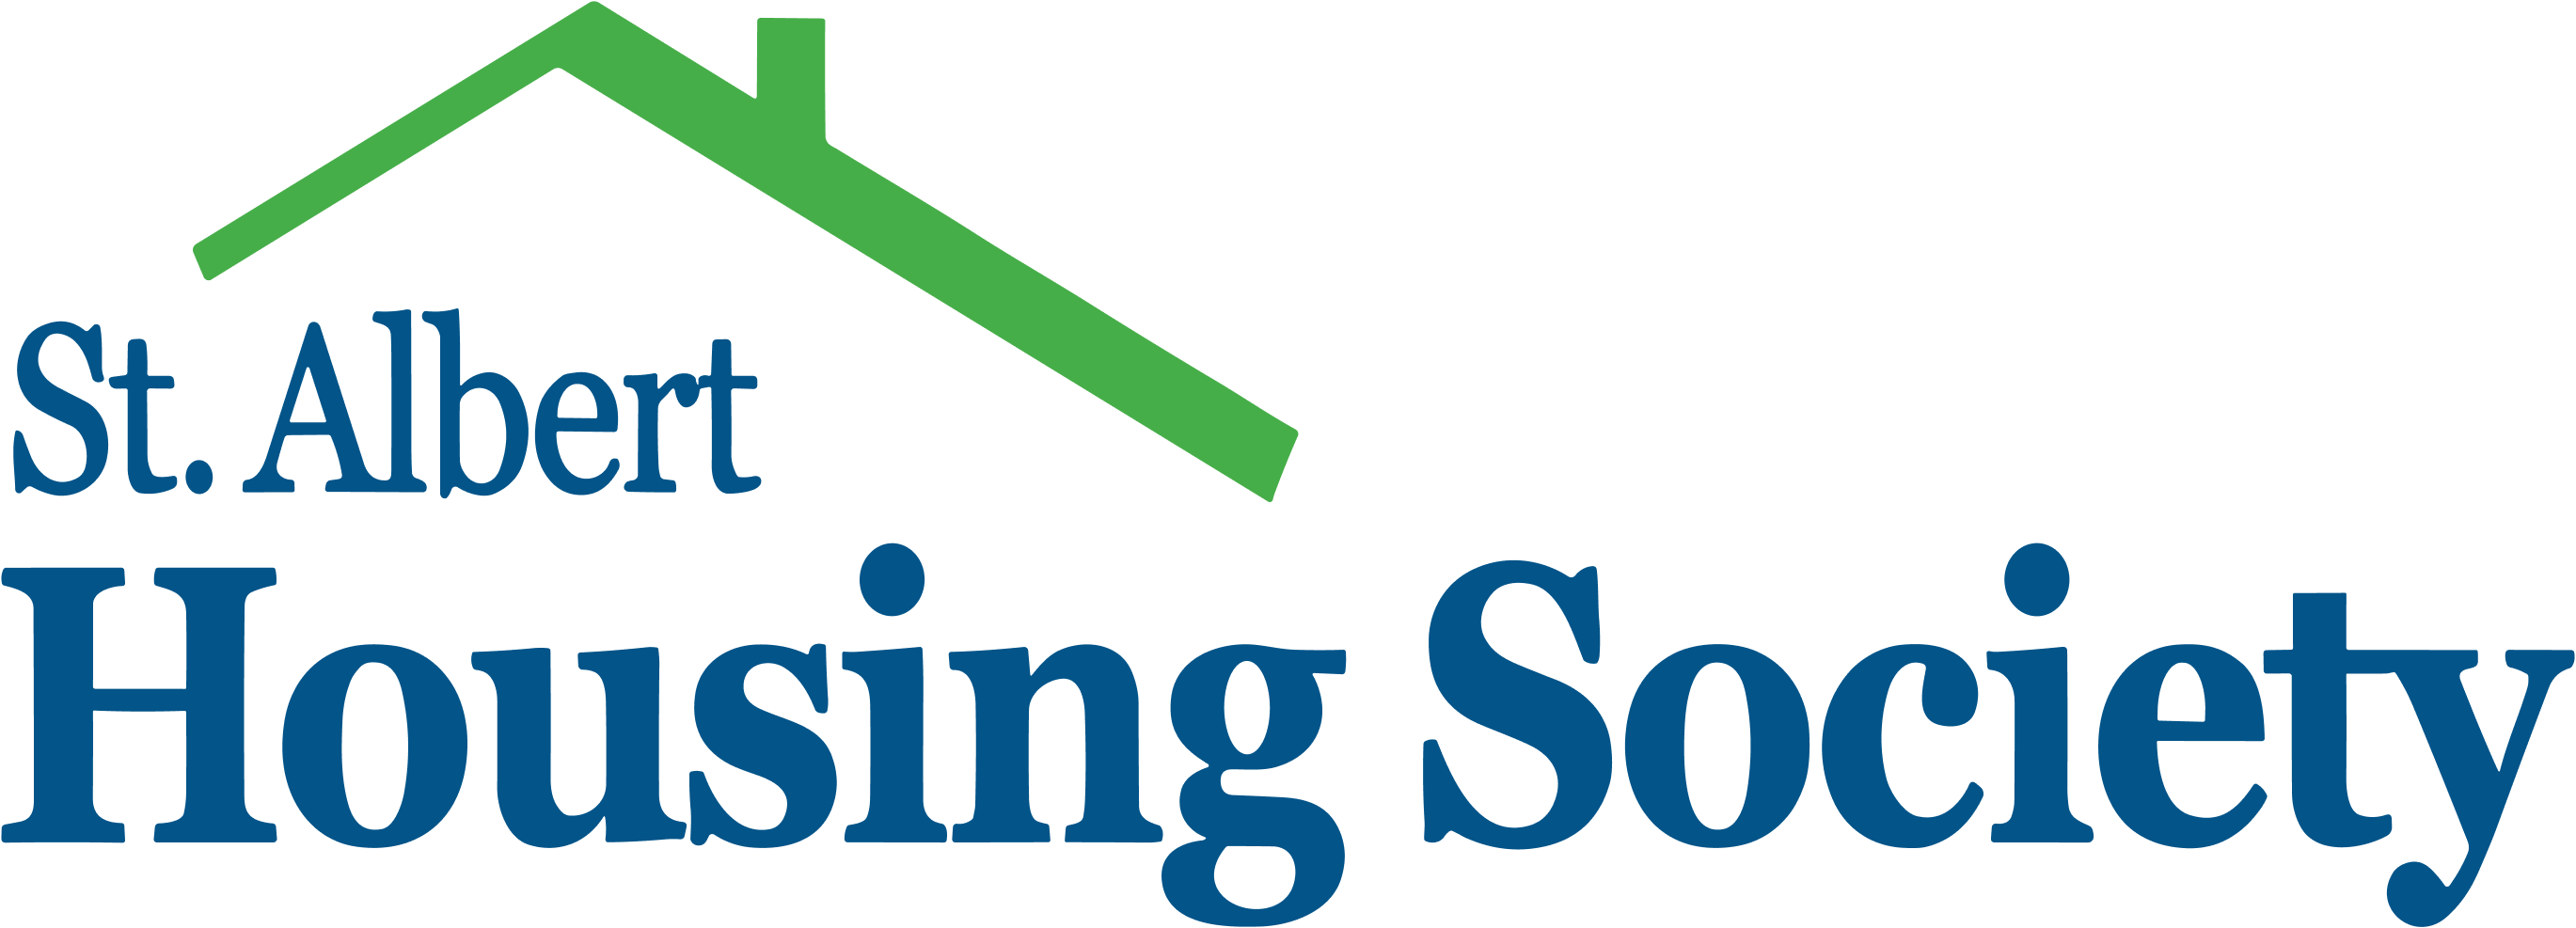 Logo for St. Albert Housing Society on a transparent background